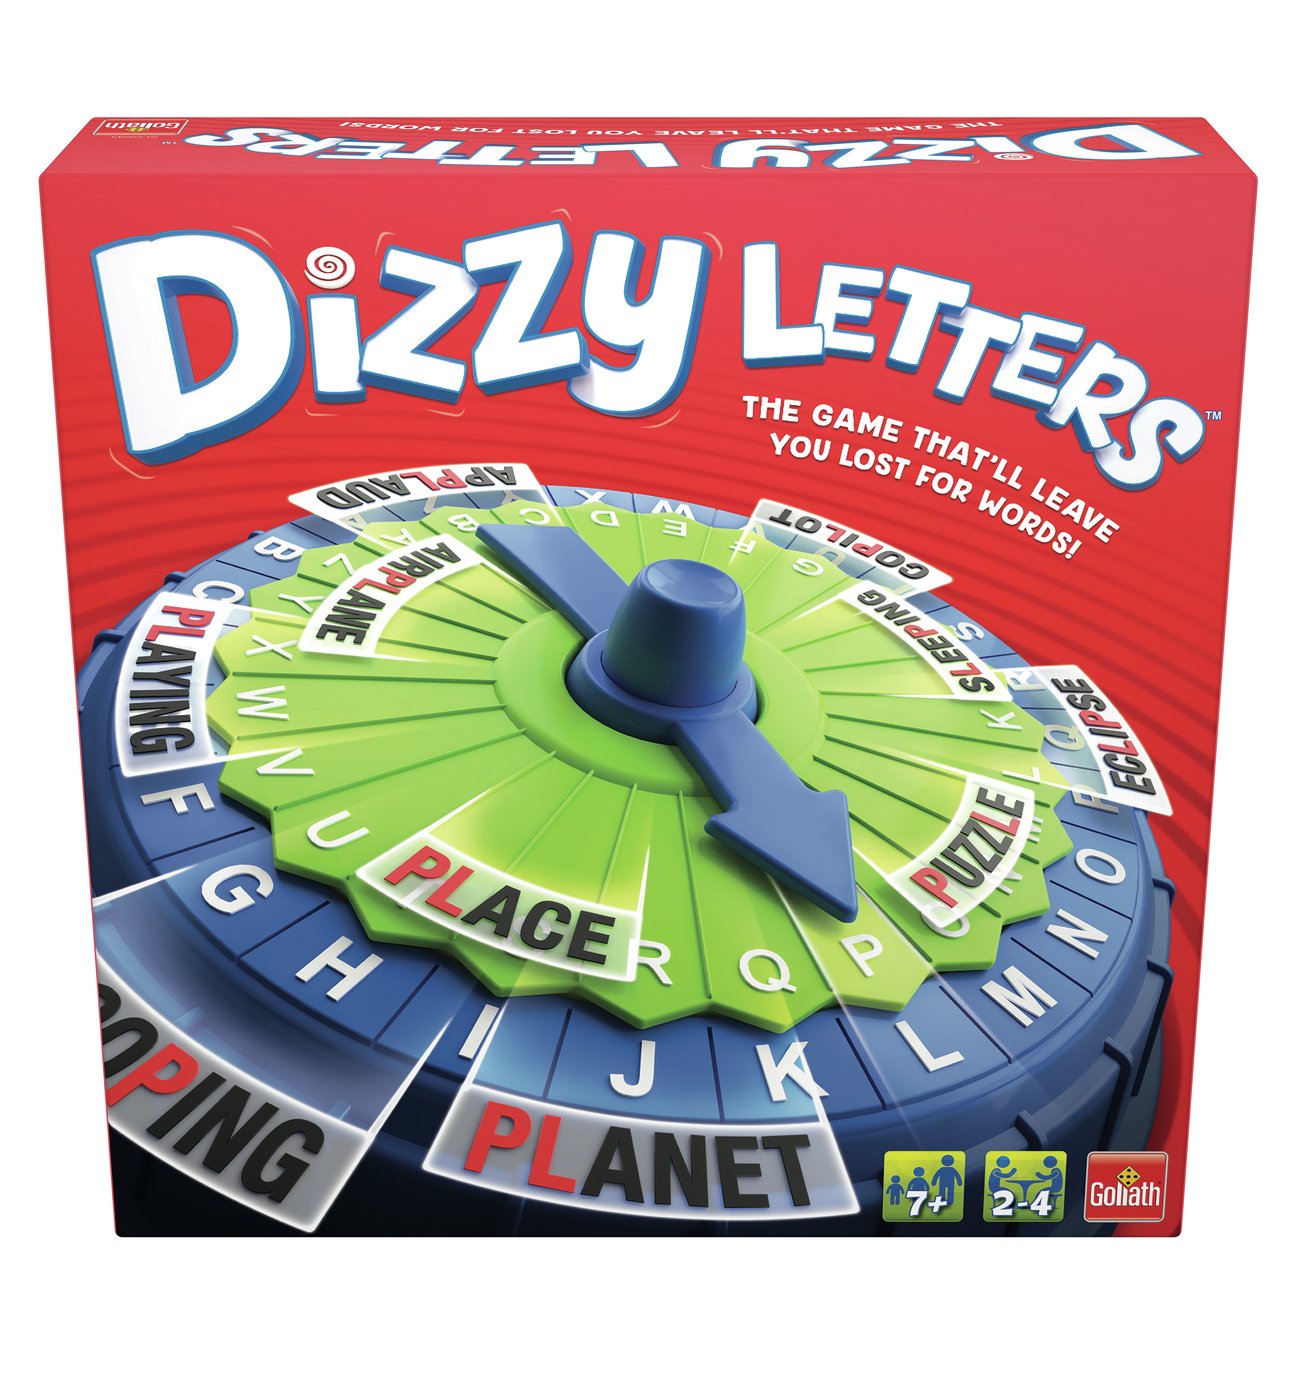 Goliath Games Dizzy Letter Disc Game